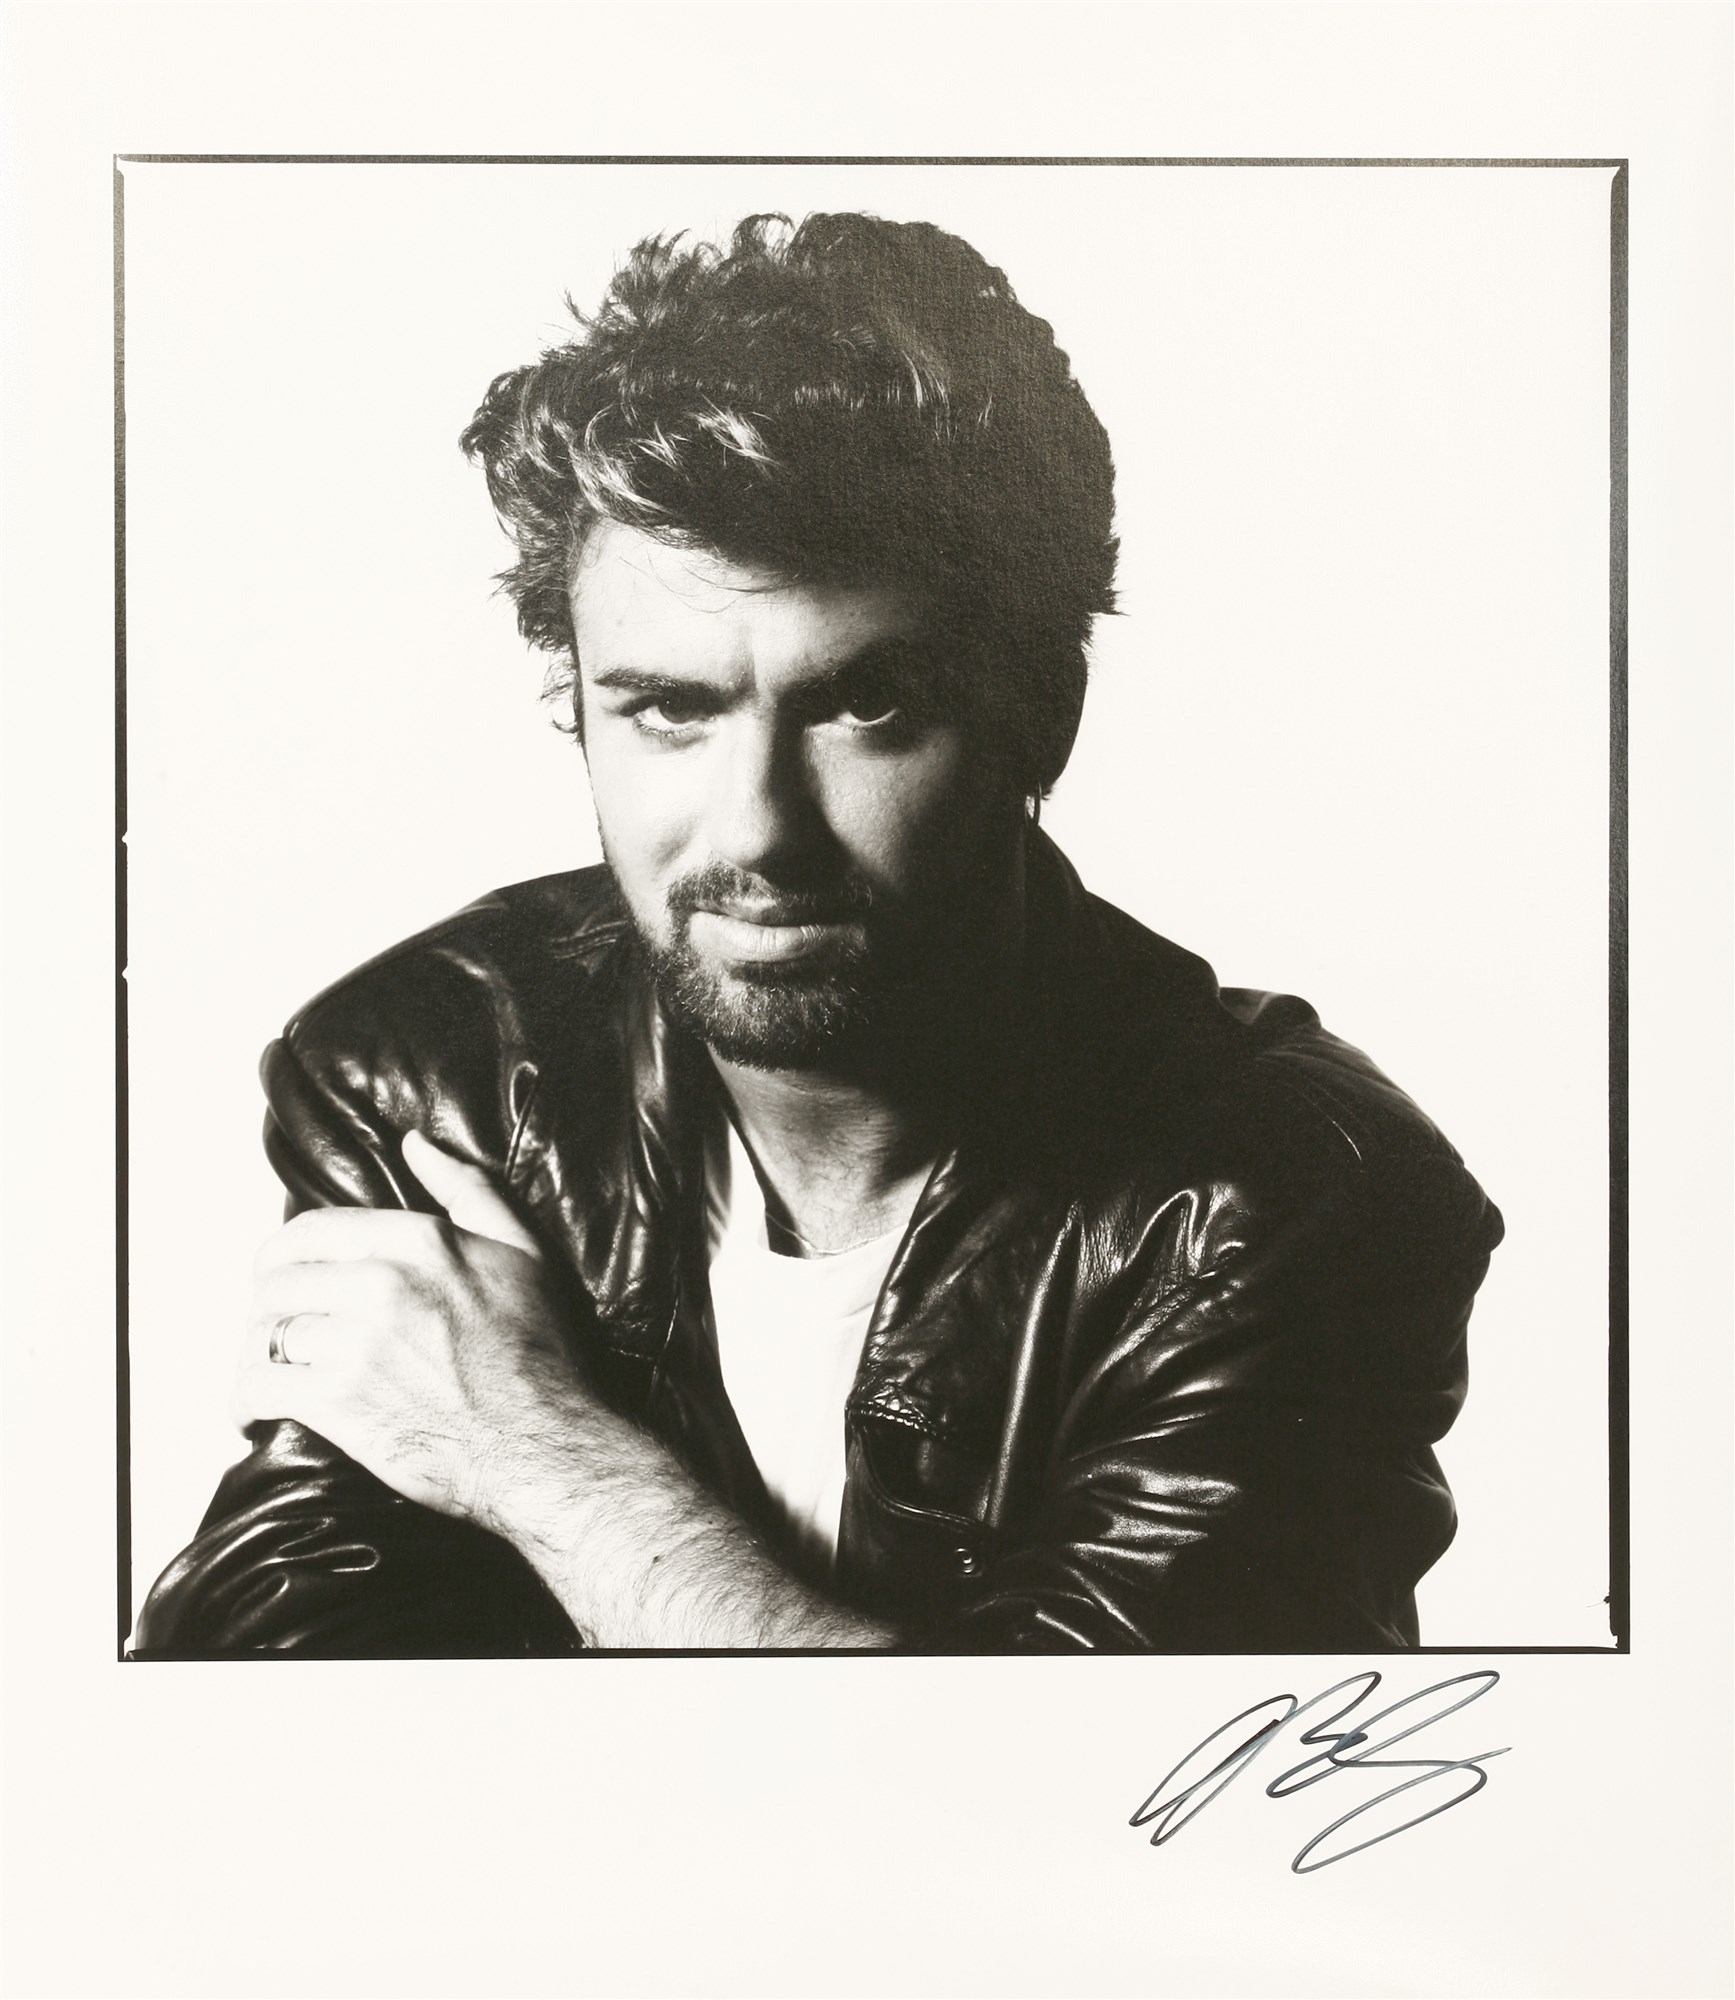 GEORGE MICHAEL, LIVE AID by David Bailey, JULY 13, 1985